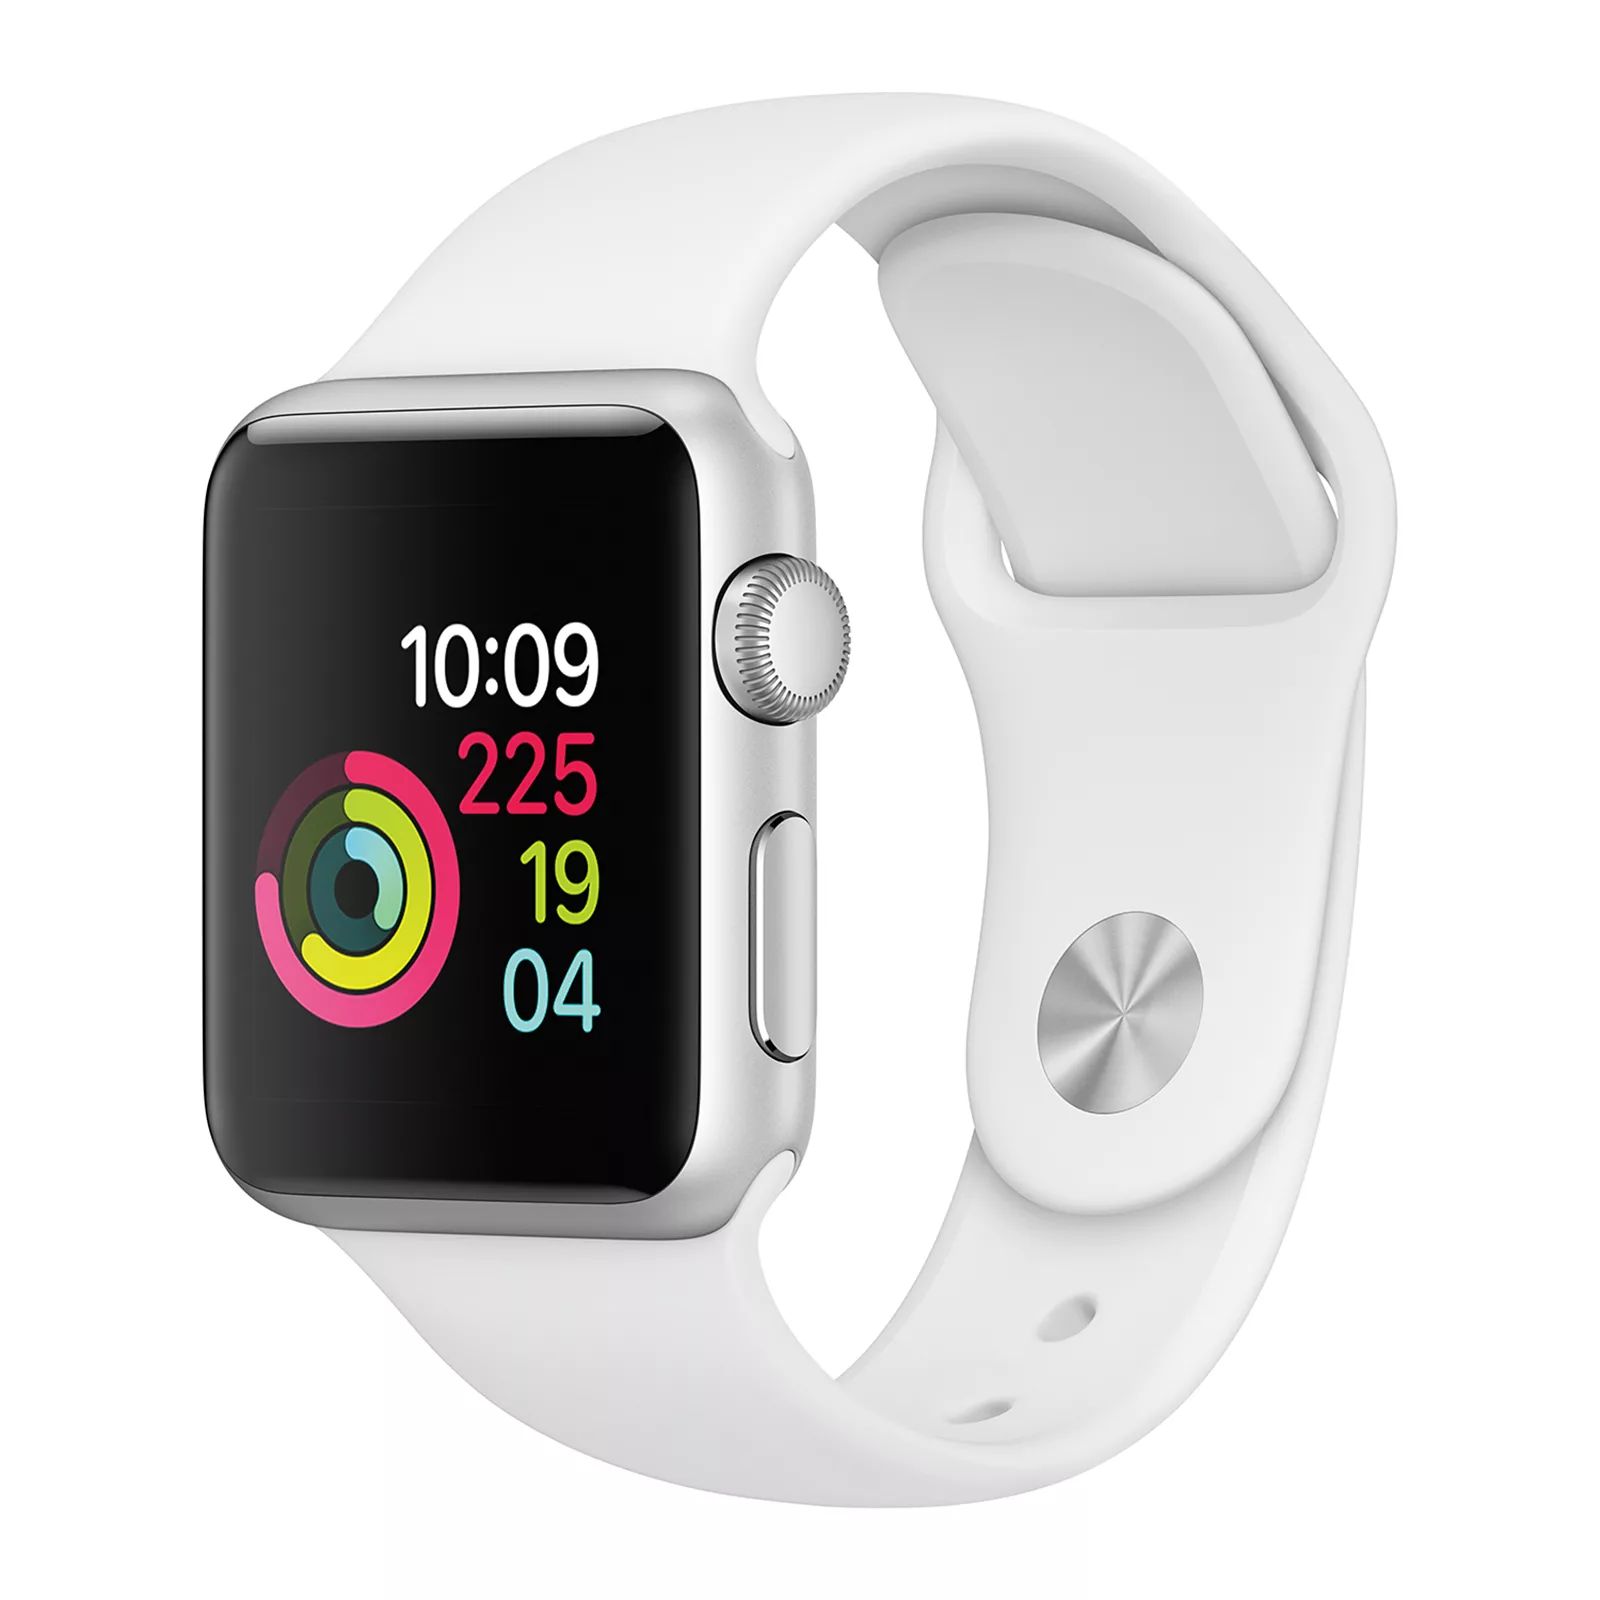 Apple Watch Series 1 (38mm White Aluminum Case with White Sport Band) | Kohl's